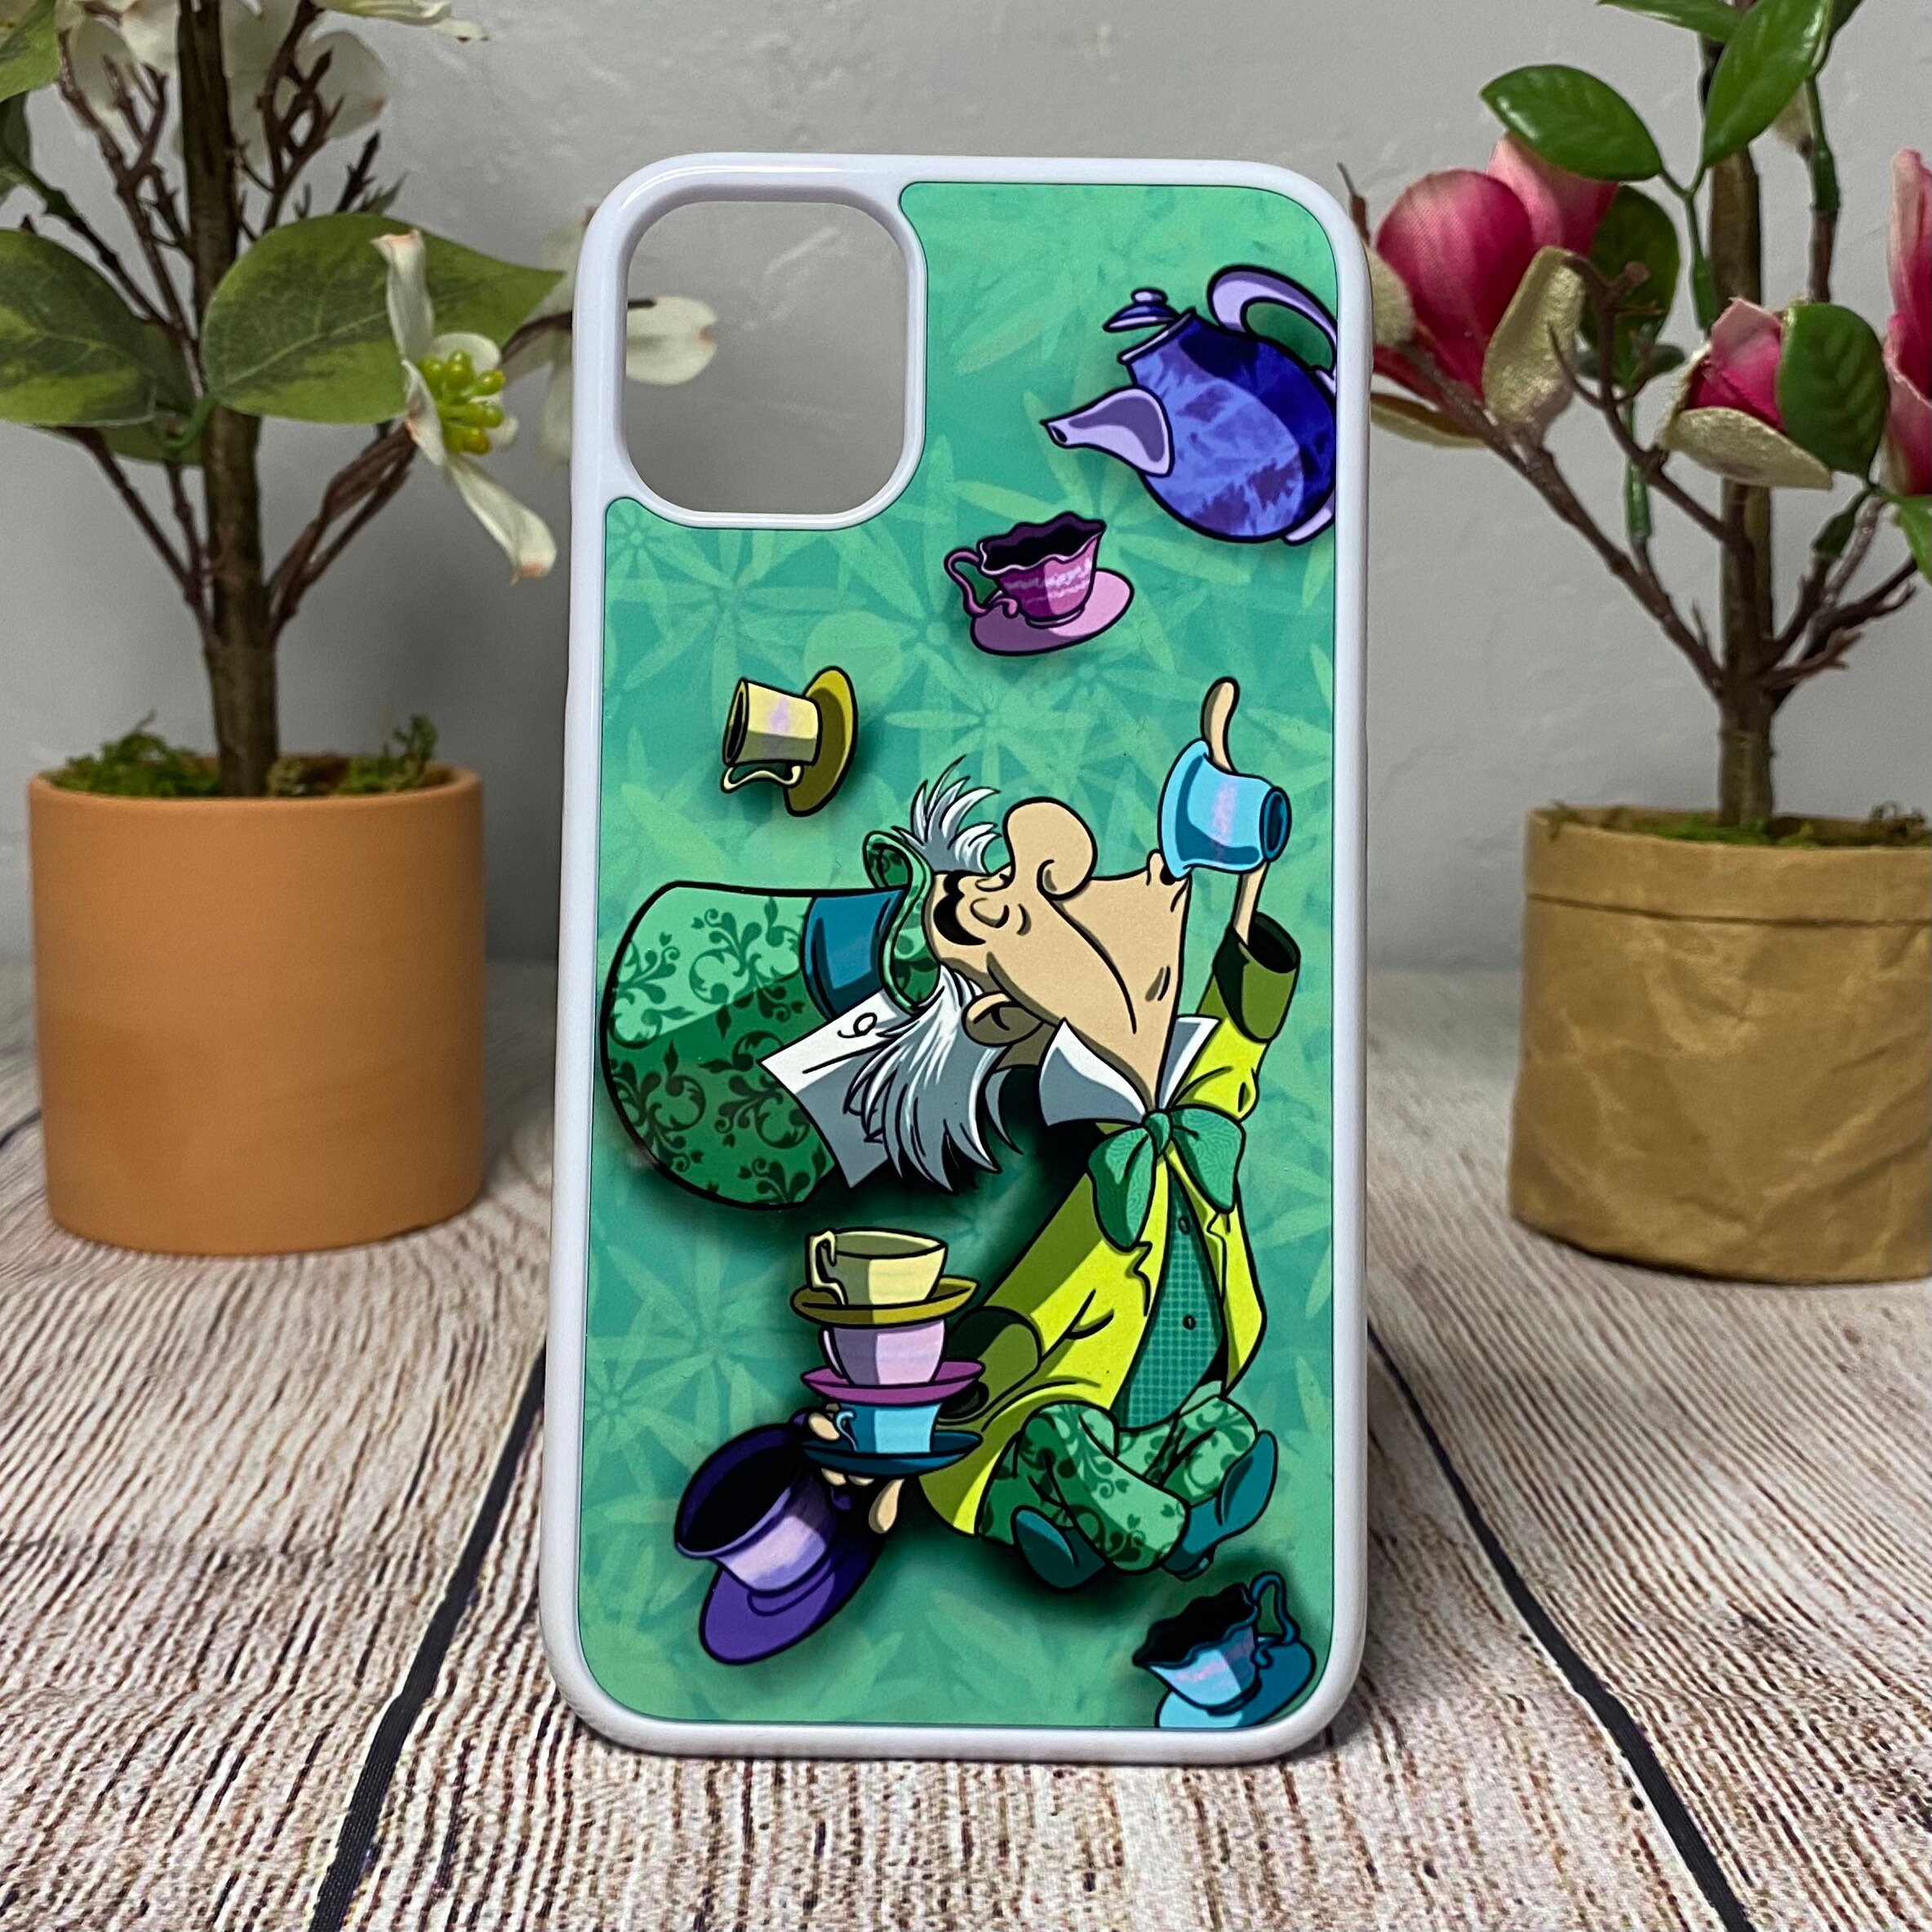 Mad World, a phone case by Adrima C. Z. - INPRNT